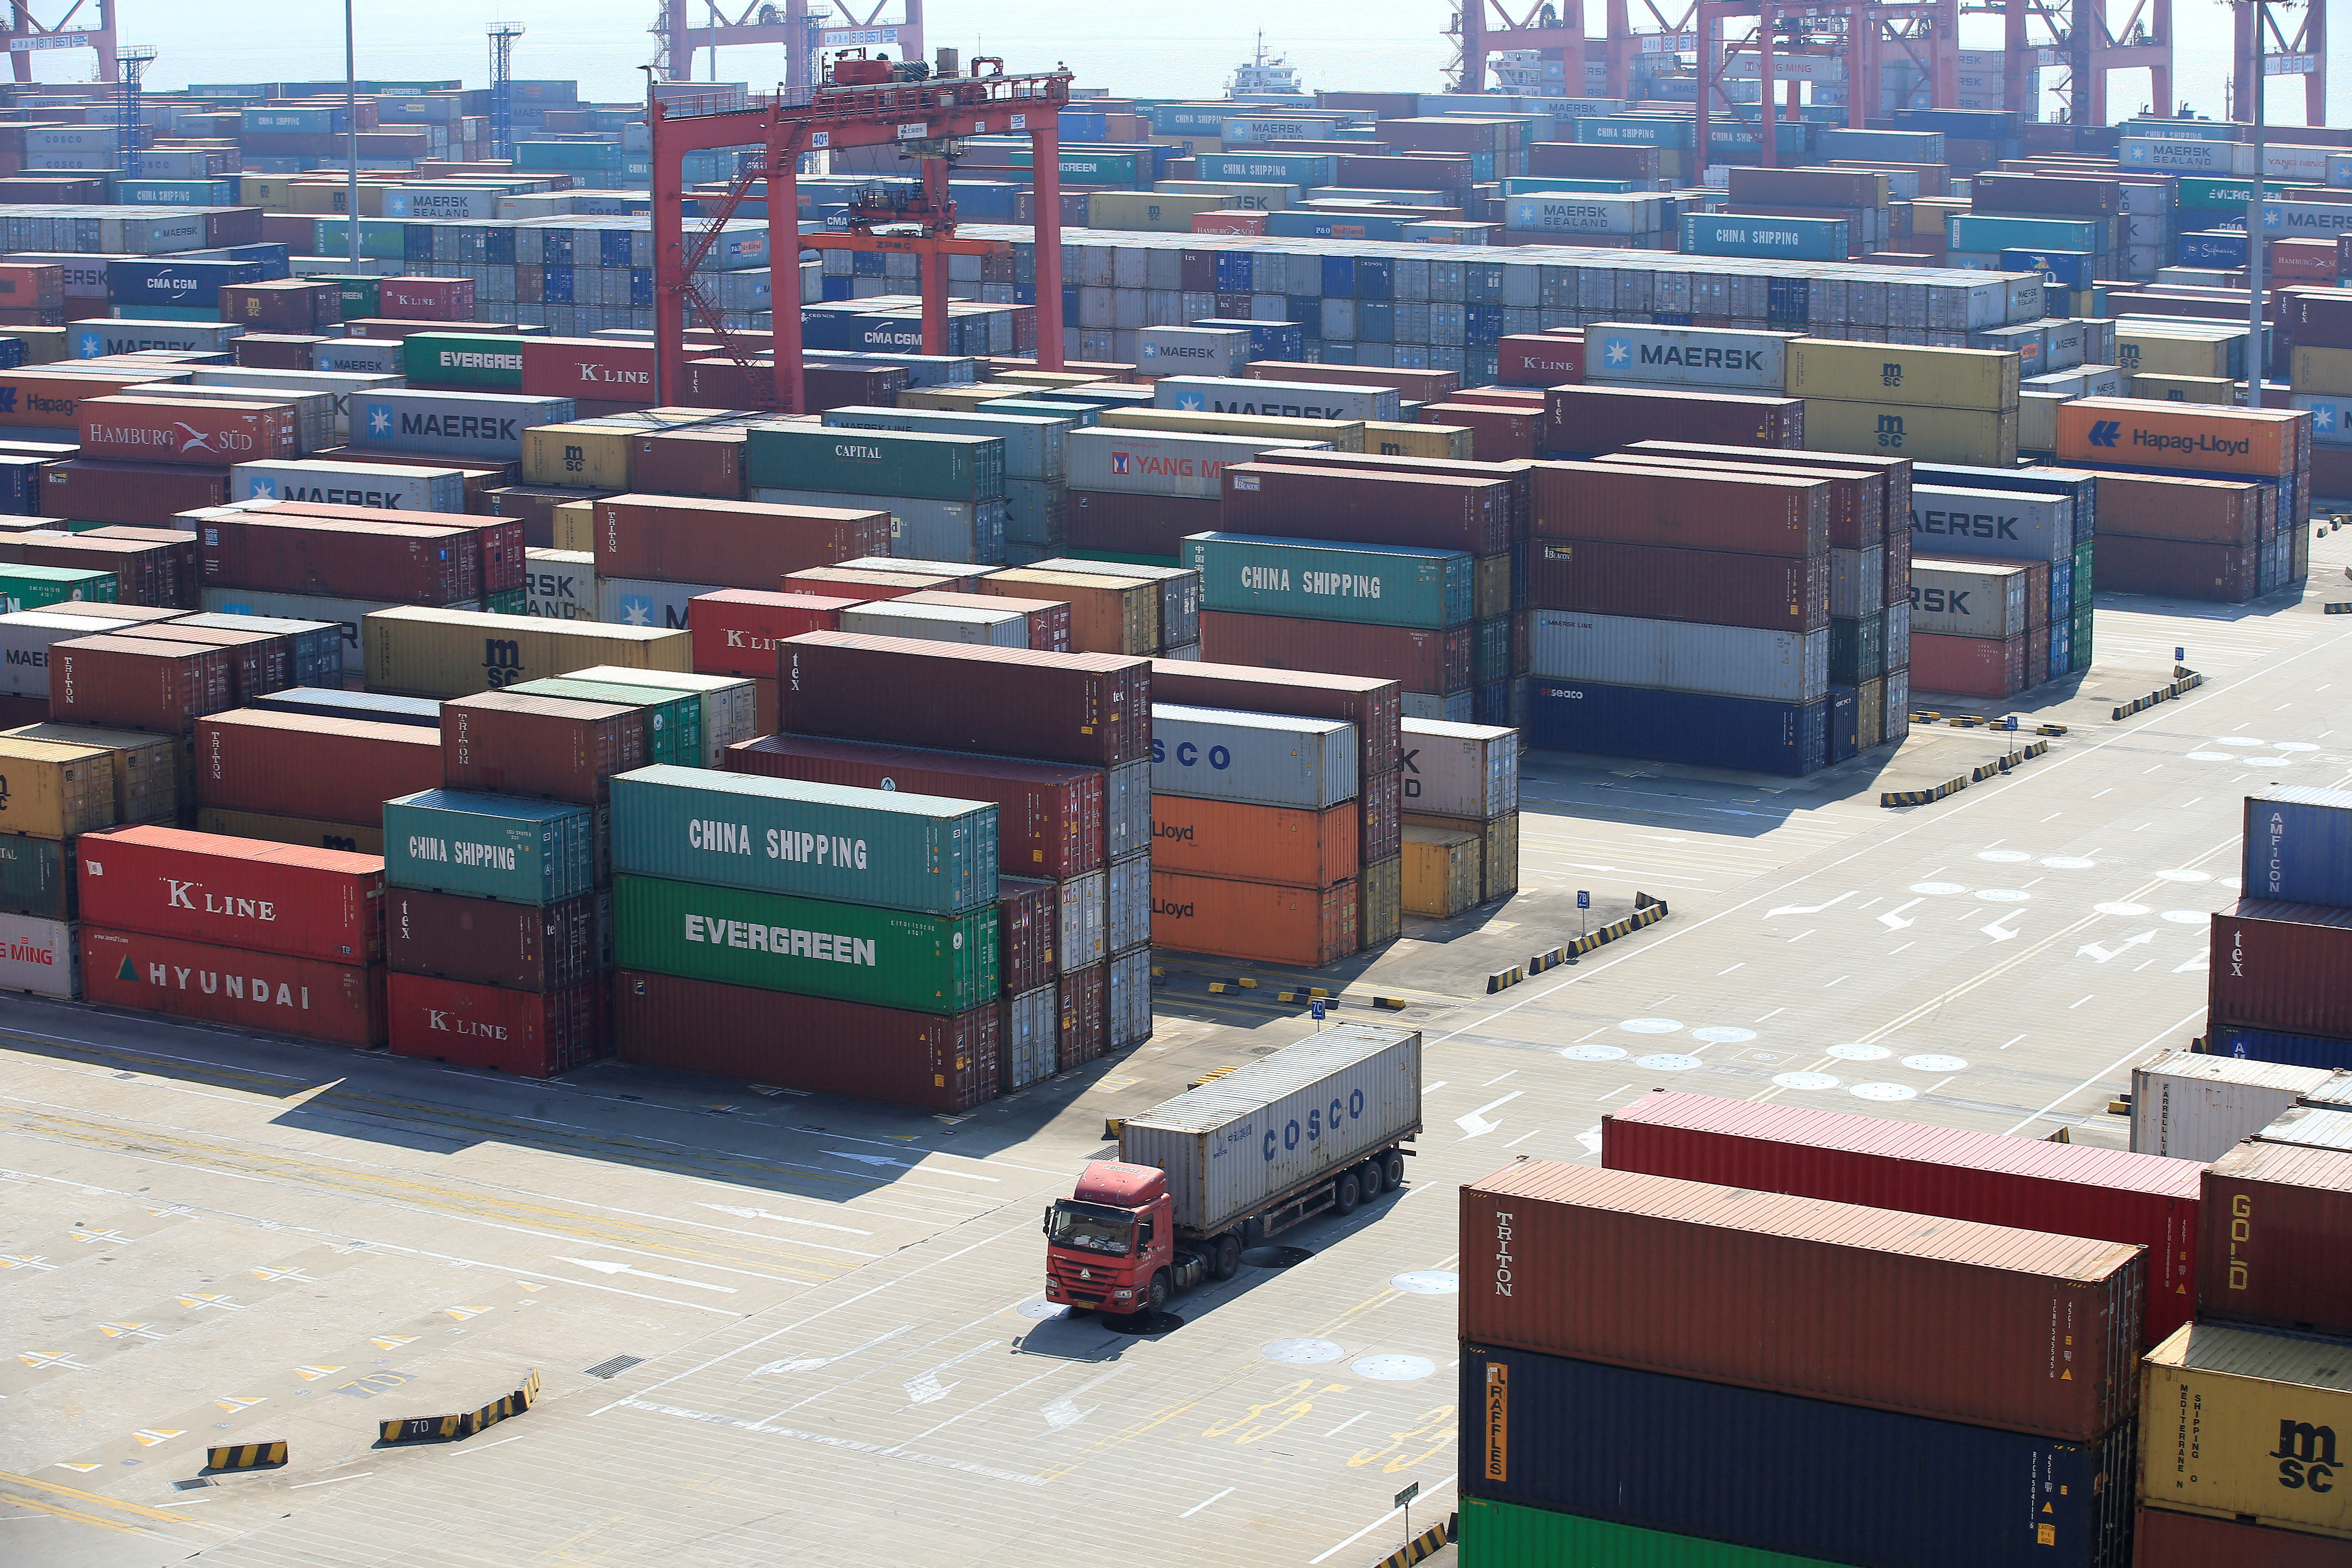 Containers are seen at the Yangshan Deep Water Port, part of the Shanghai Free Trade Zone, in Shanghai